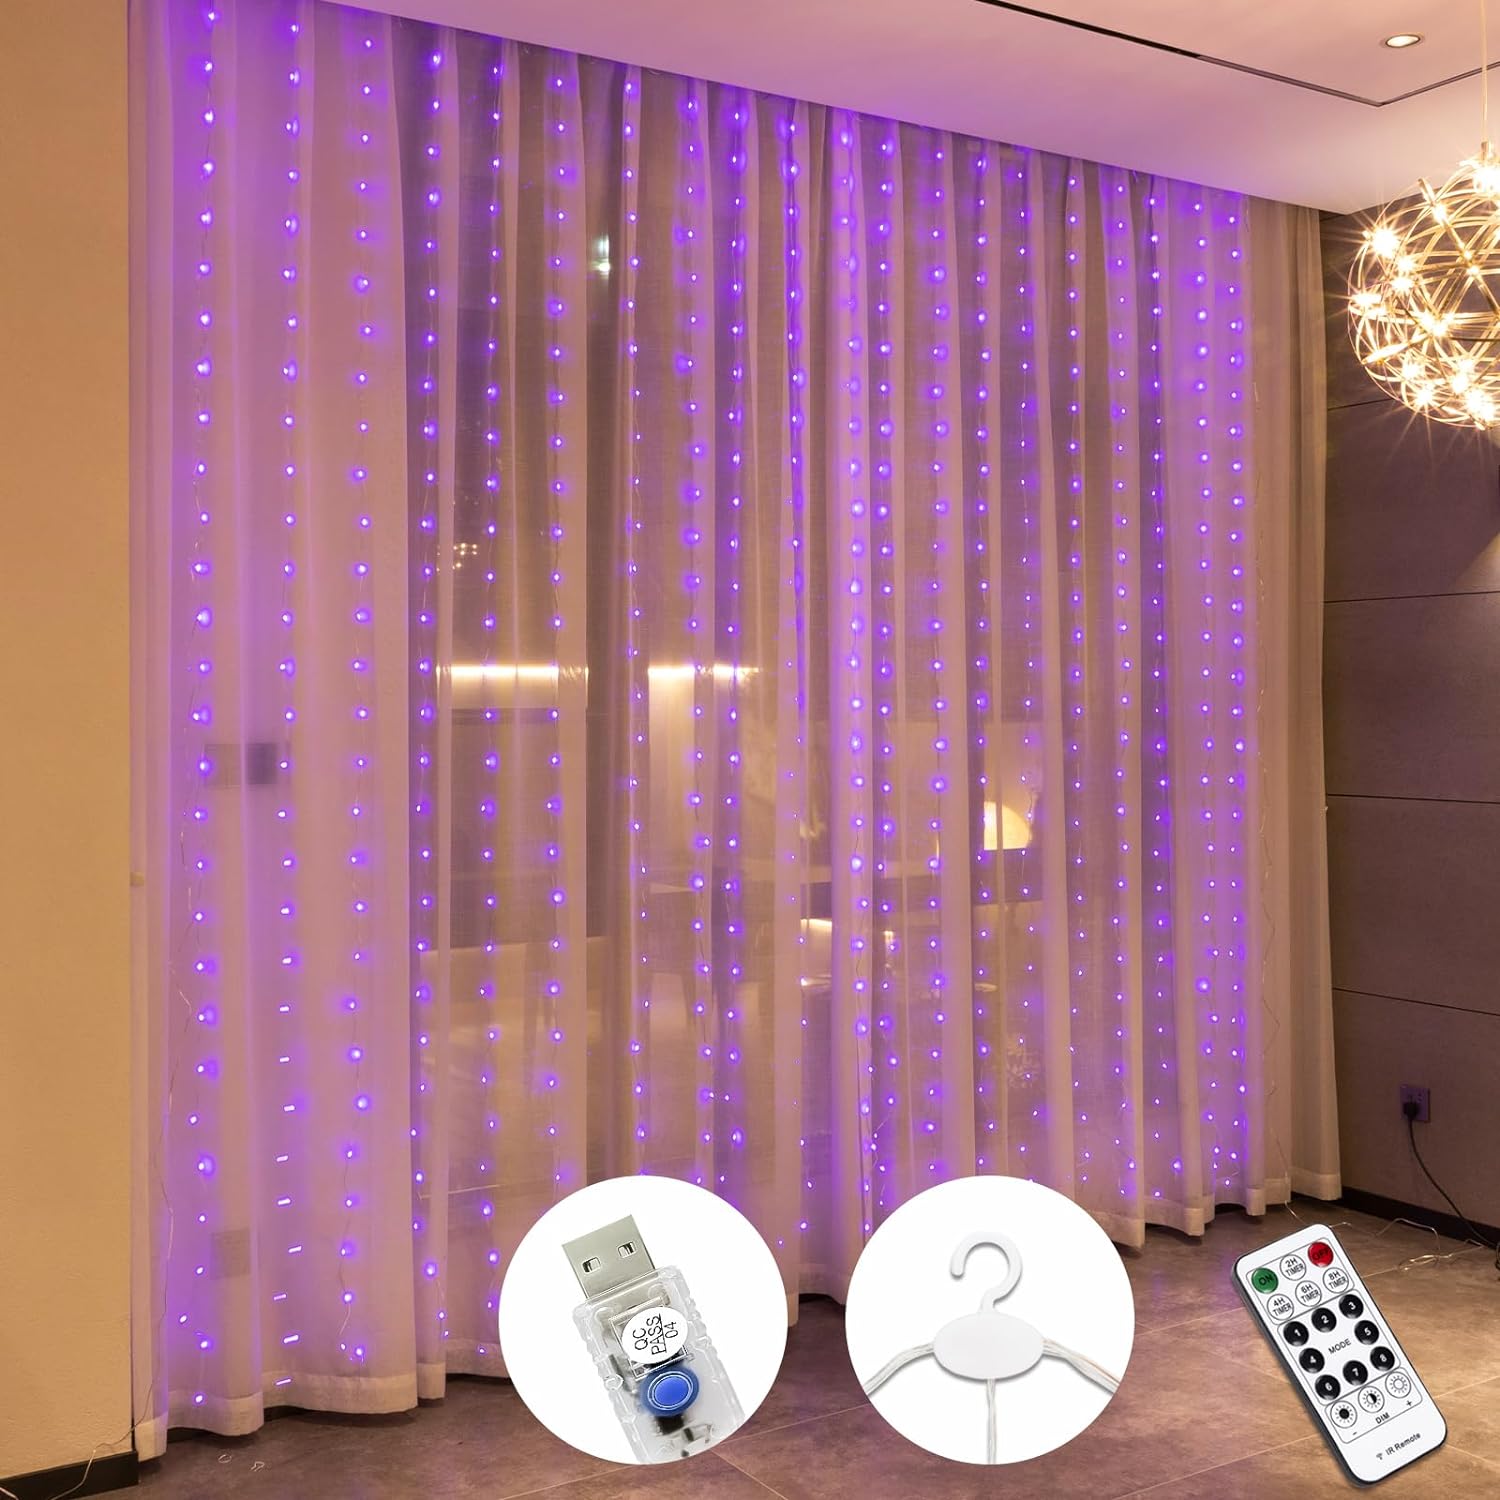 Purple Curtain Light with Untangled Wires for Bedroom, 300LED 9.8ft x 9.8ft Window Fairy Curtain String Light with 16 Hooks, 8 Modes Remote Control for Wedding Party Home Indoor Decorations